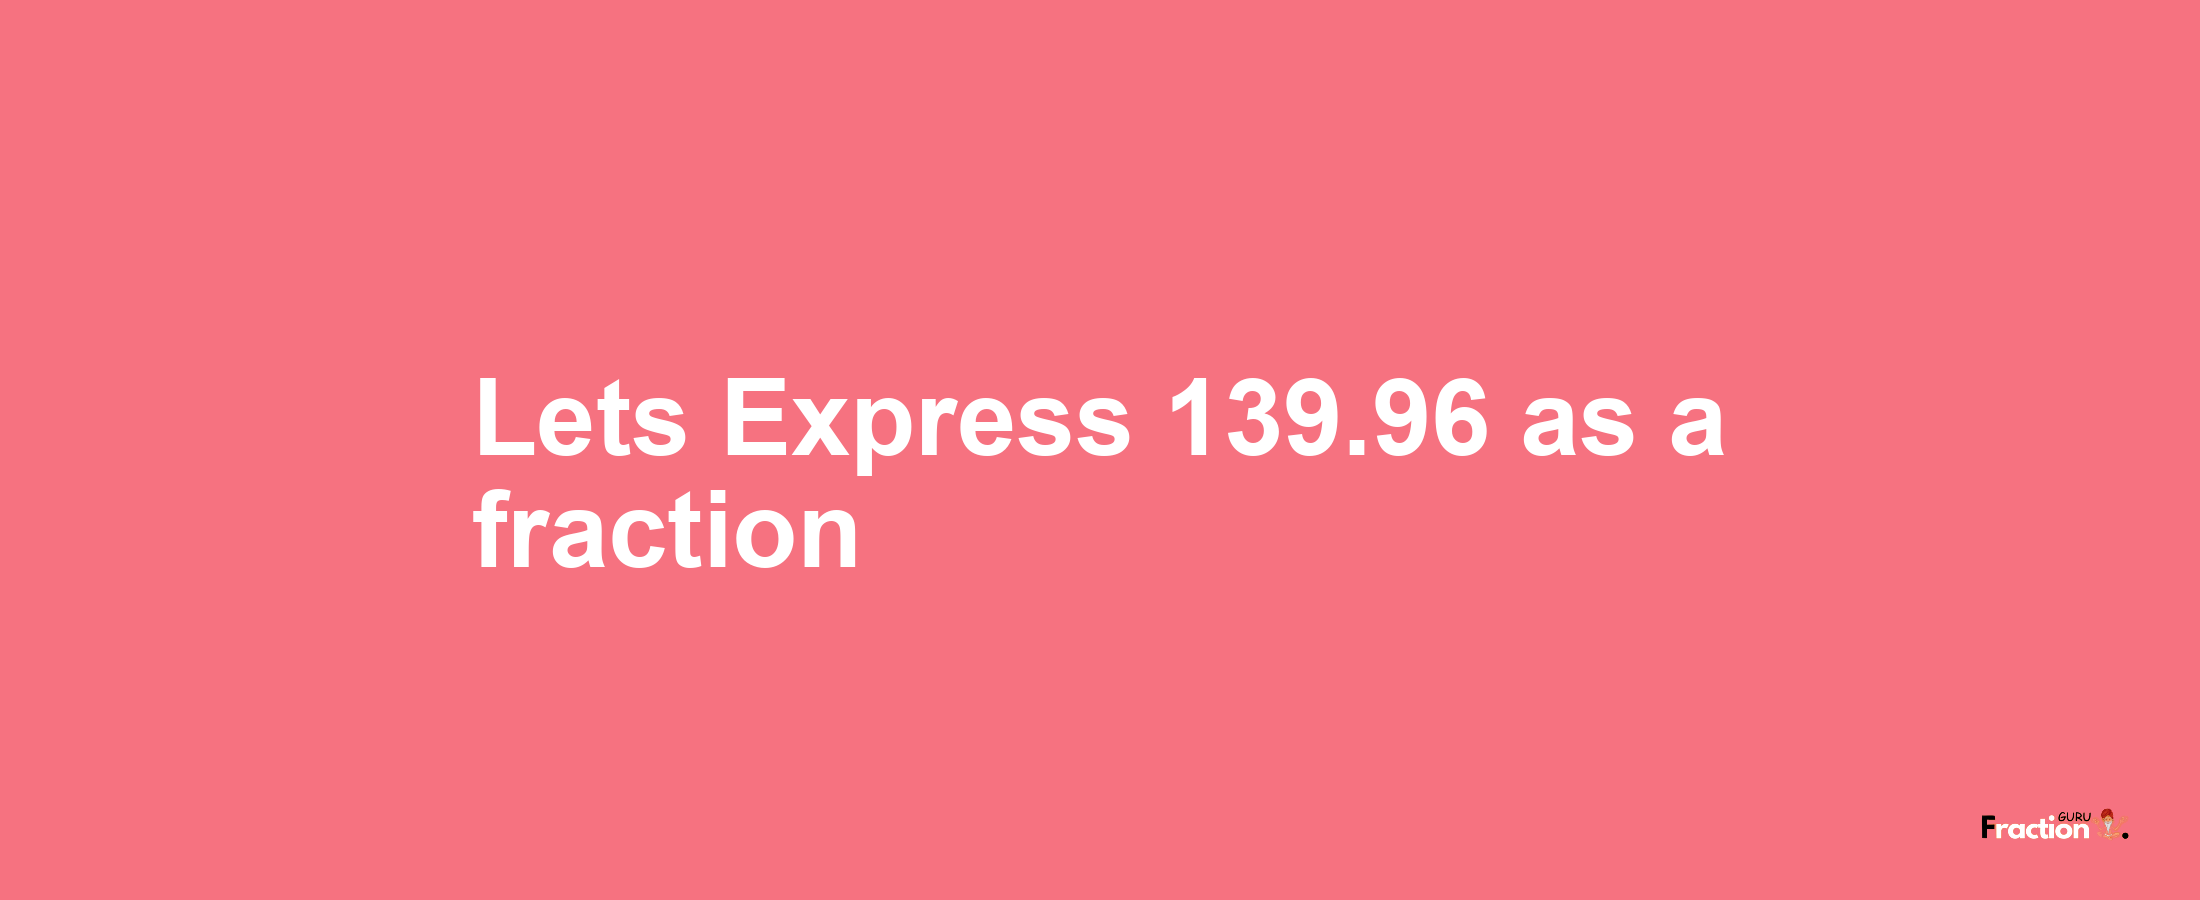 Lets Express 139.96 as afraction